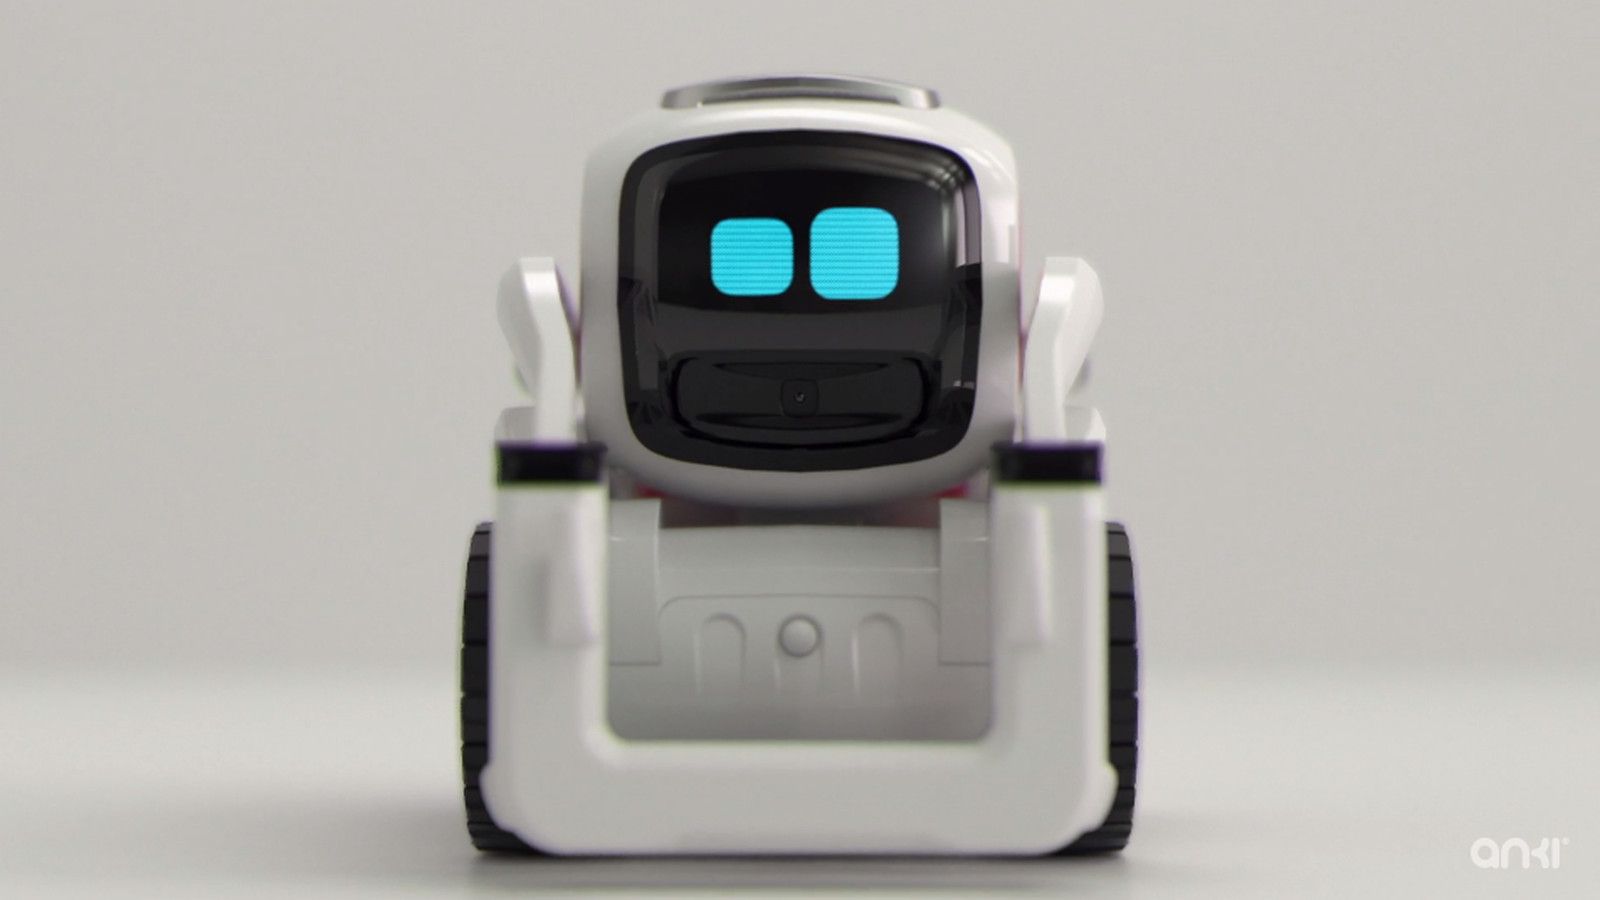 Anki's Cozmo Robot Is The Real Life WALL E We've Been Waiting For